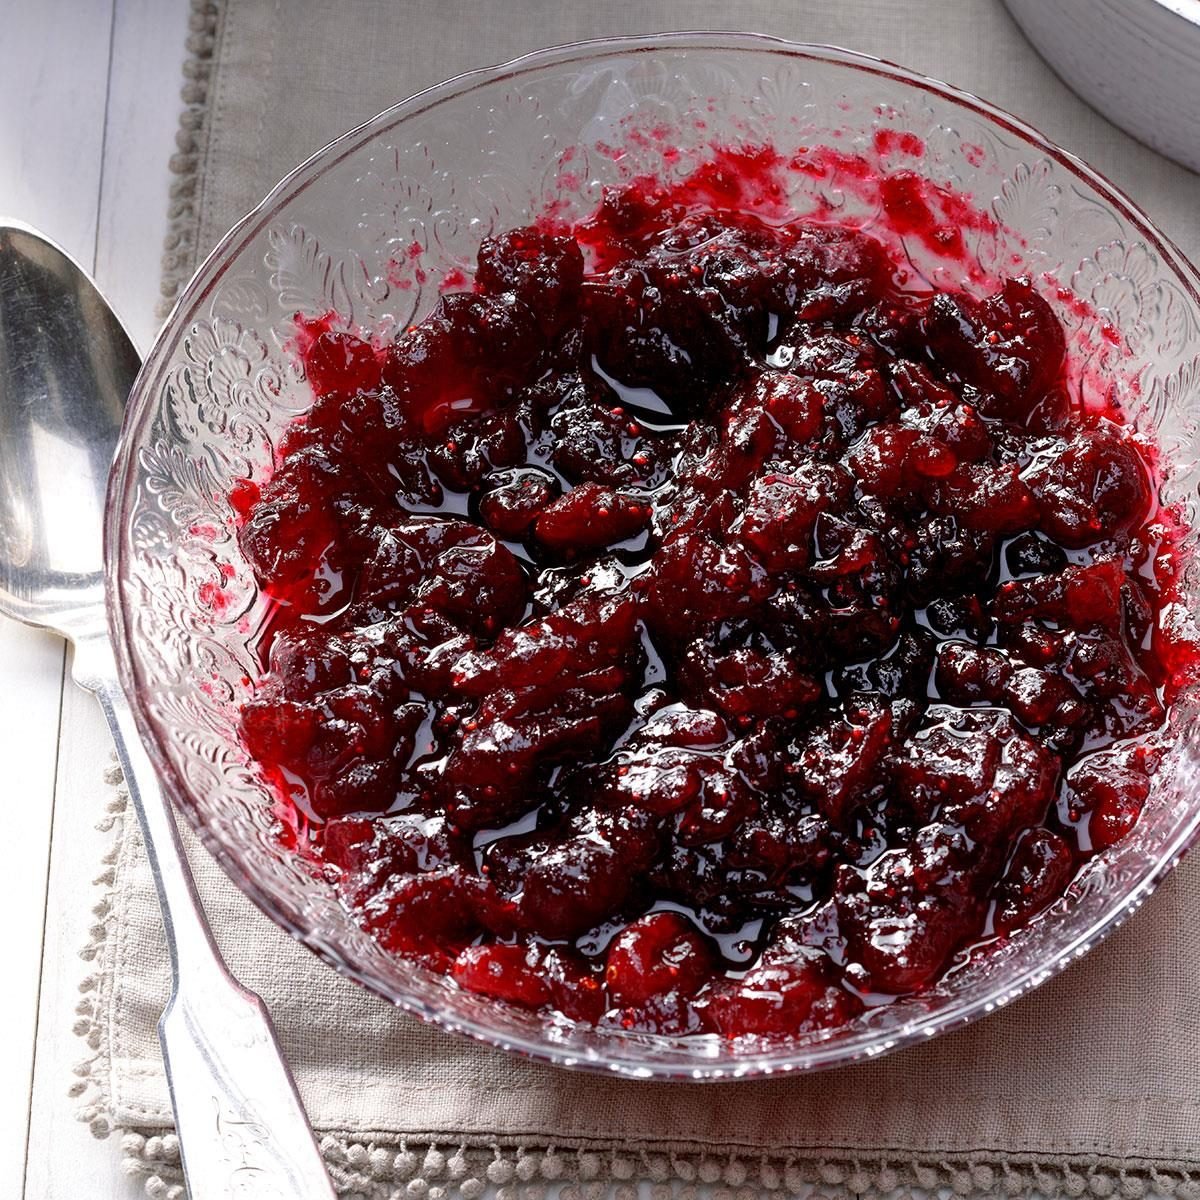 Spiced Cranberry Sauce Recipe: How to Make It